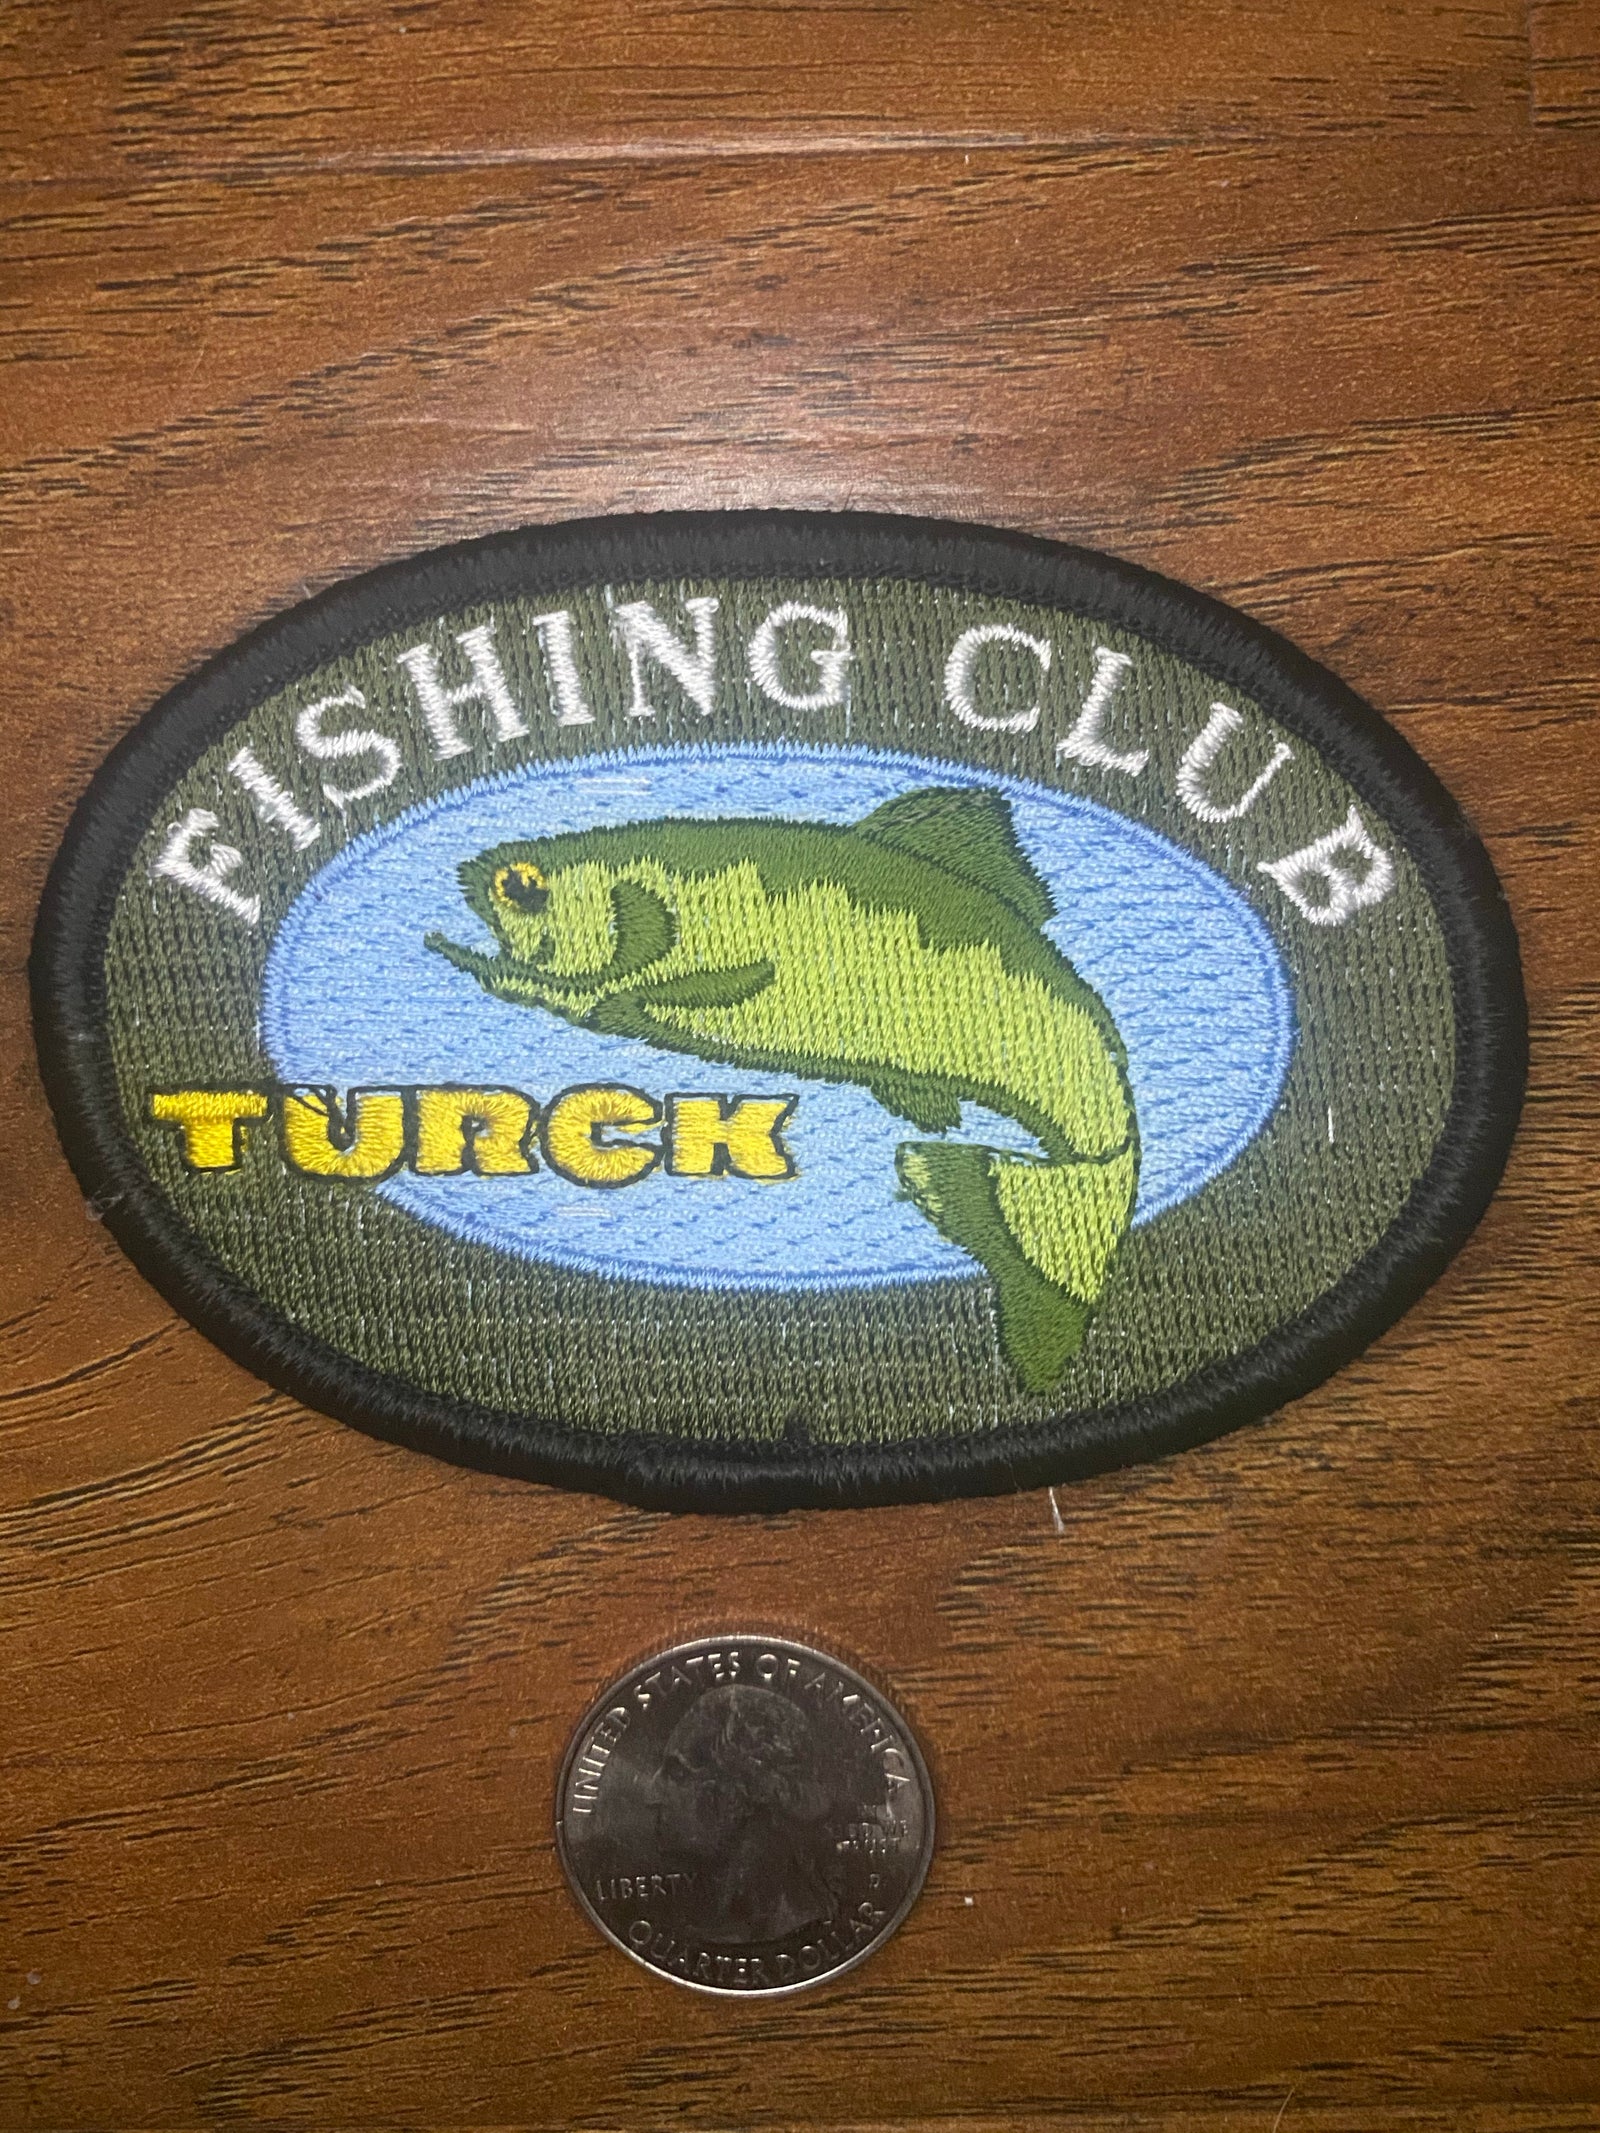 Vintage North American Hunting Club Large Patch 